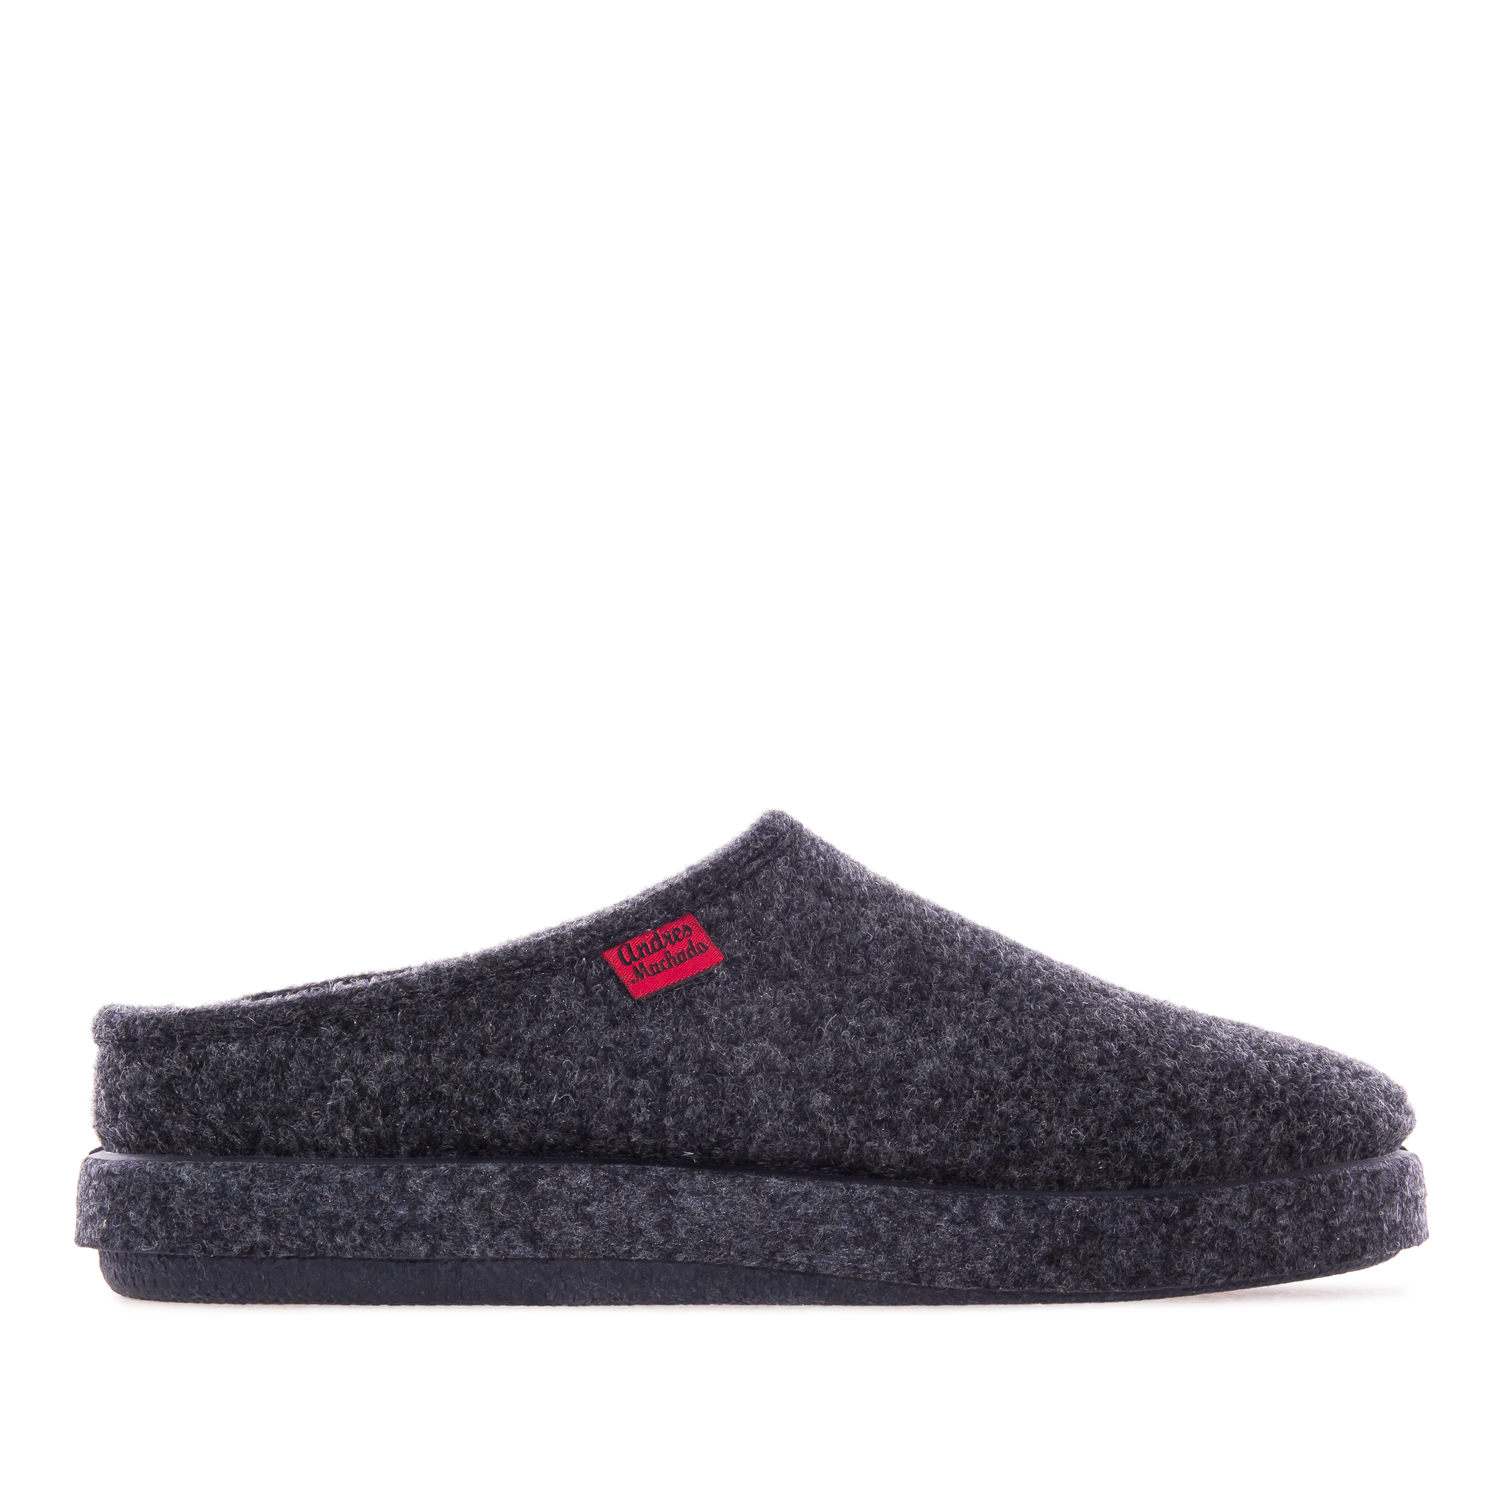 Very comfortable Navy Blue Felt Slippers with footbed 